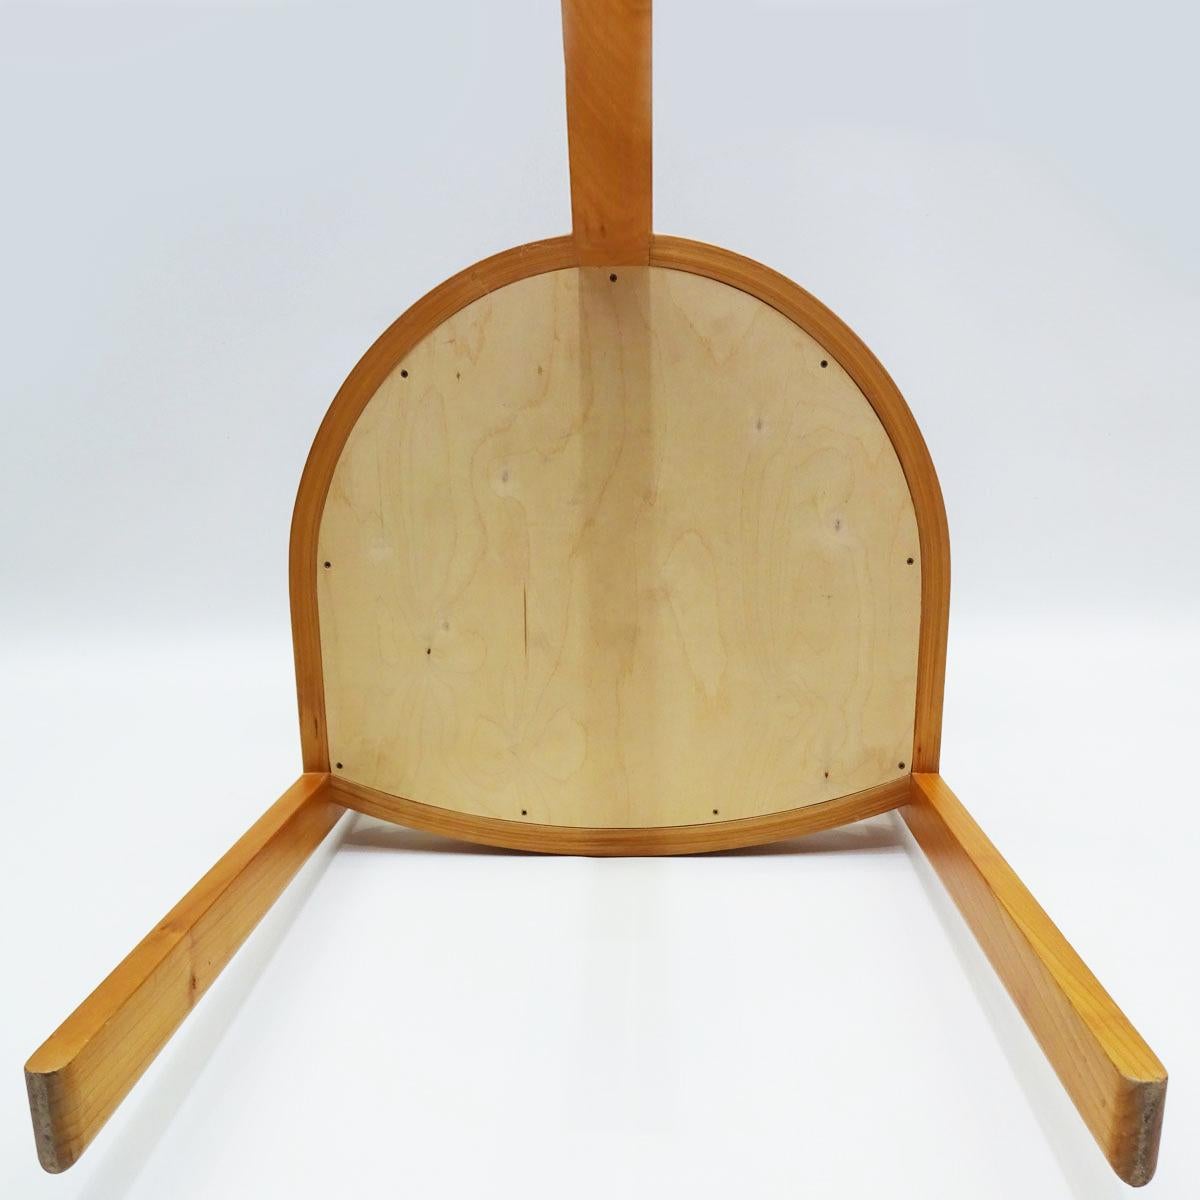 20th Century Unique Chair by Danish Master Craftsmen Rud Thygesen and Niels Roth Andersen